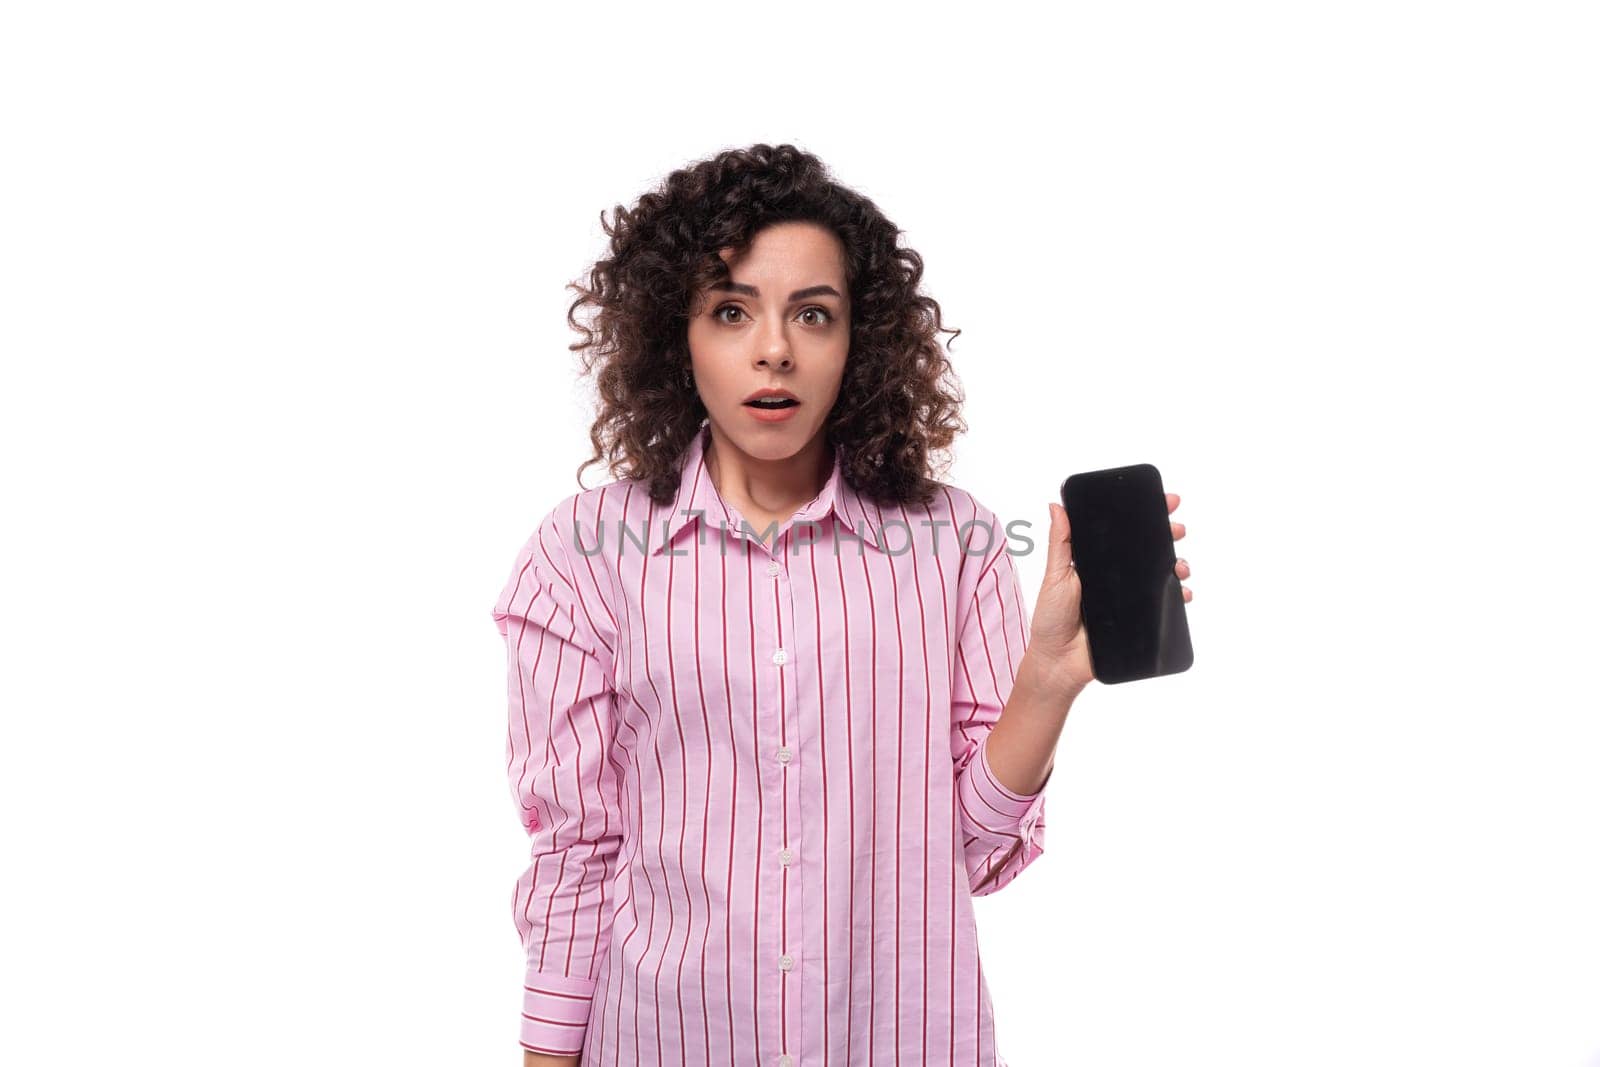 portrait of a surprised 30 year old slim curly brunette woman model dressed in a pink shirt with a smartphone in her hands. e-business concept.